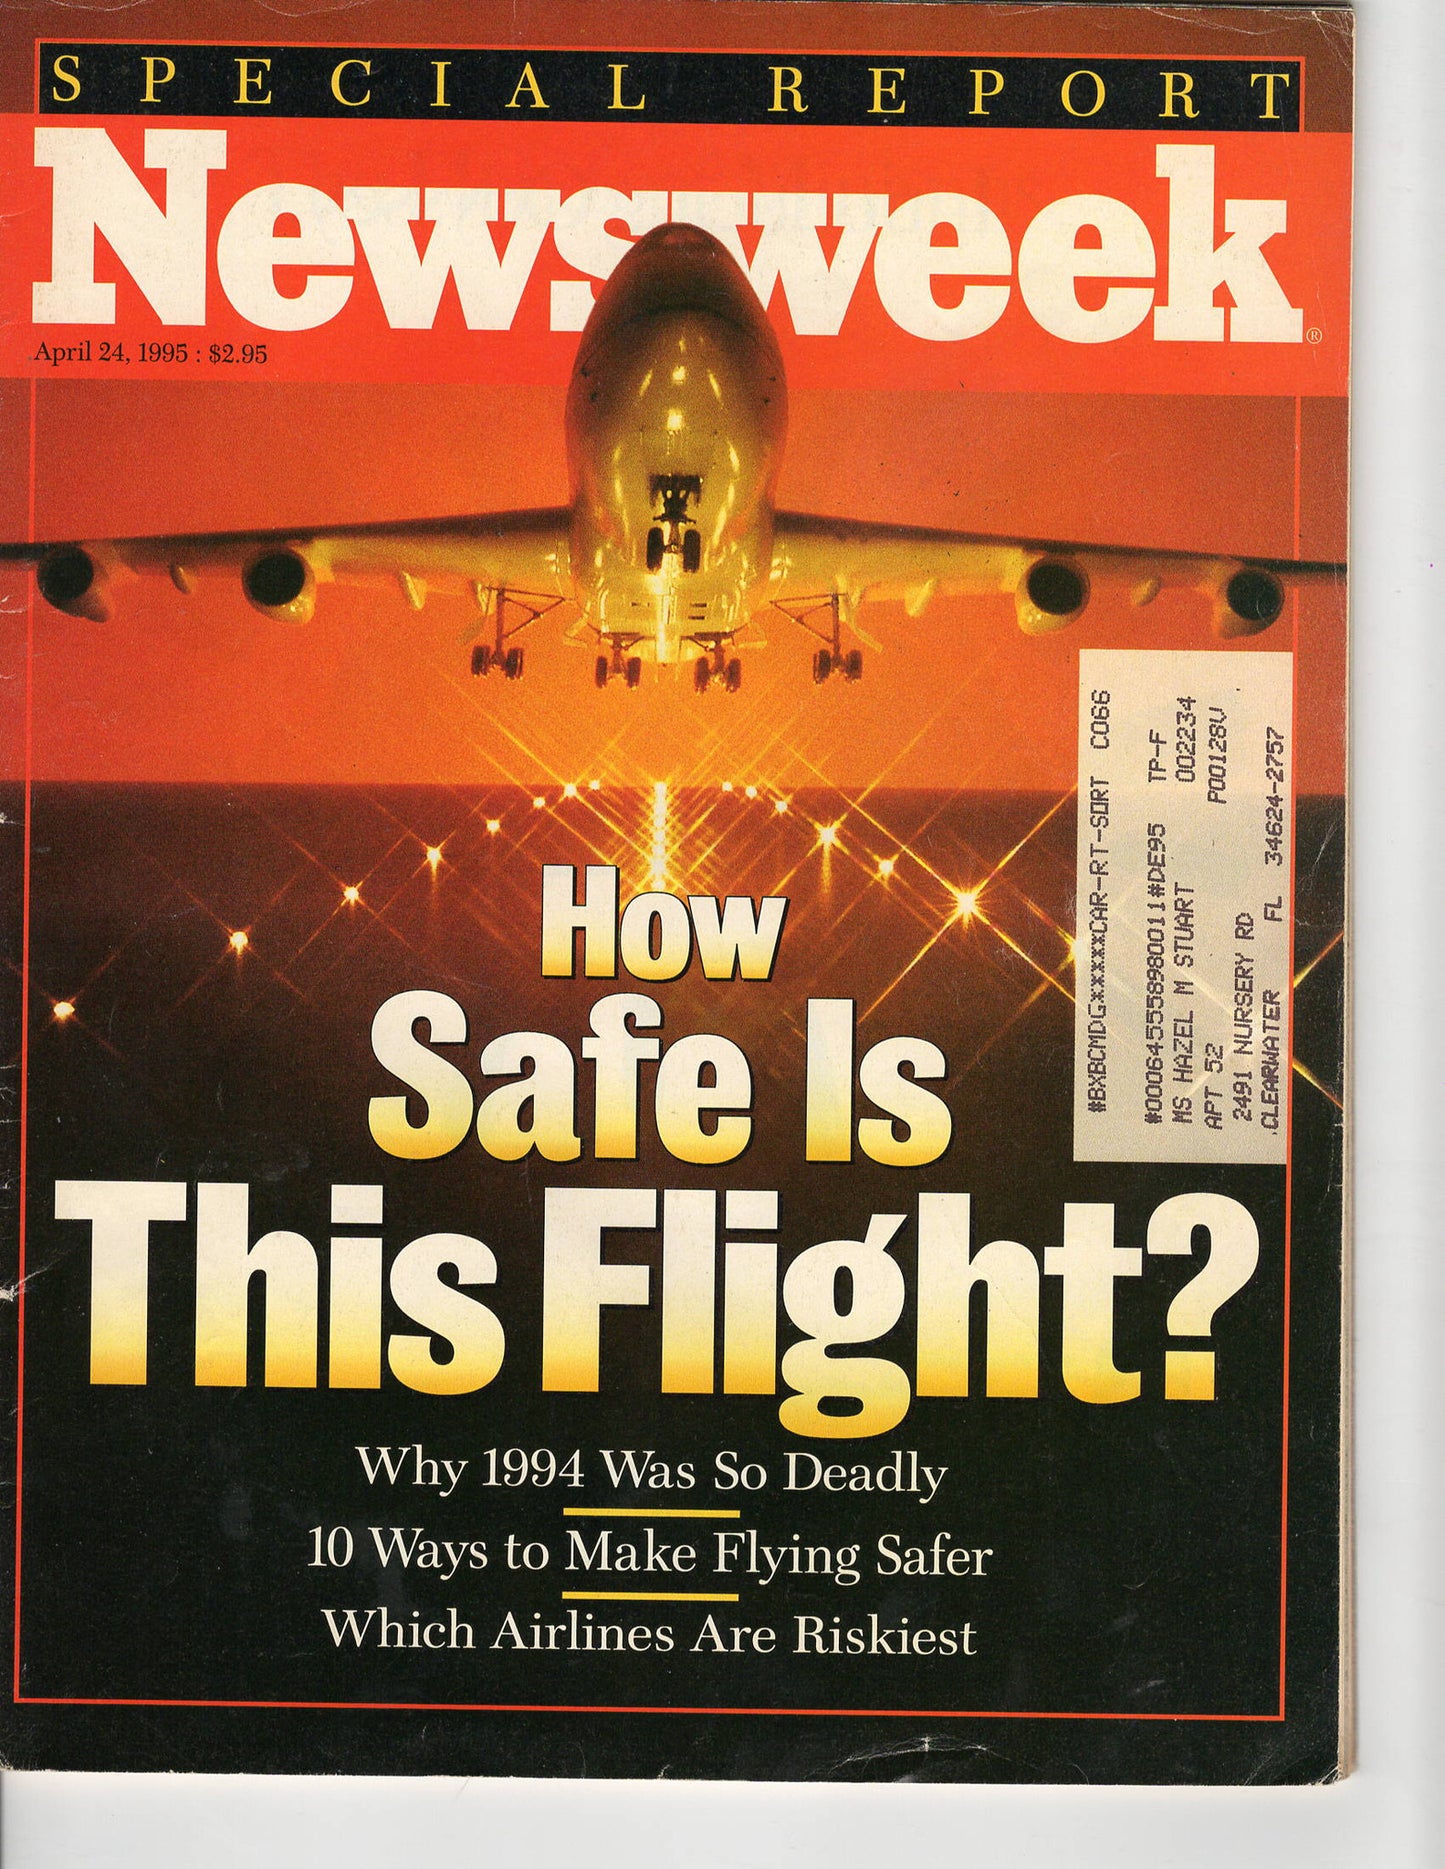 04 24 1995 Newsweek - How Safe is This Flight